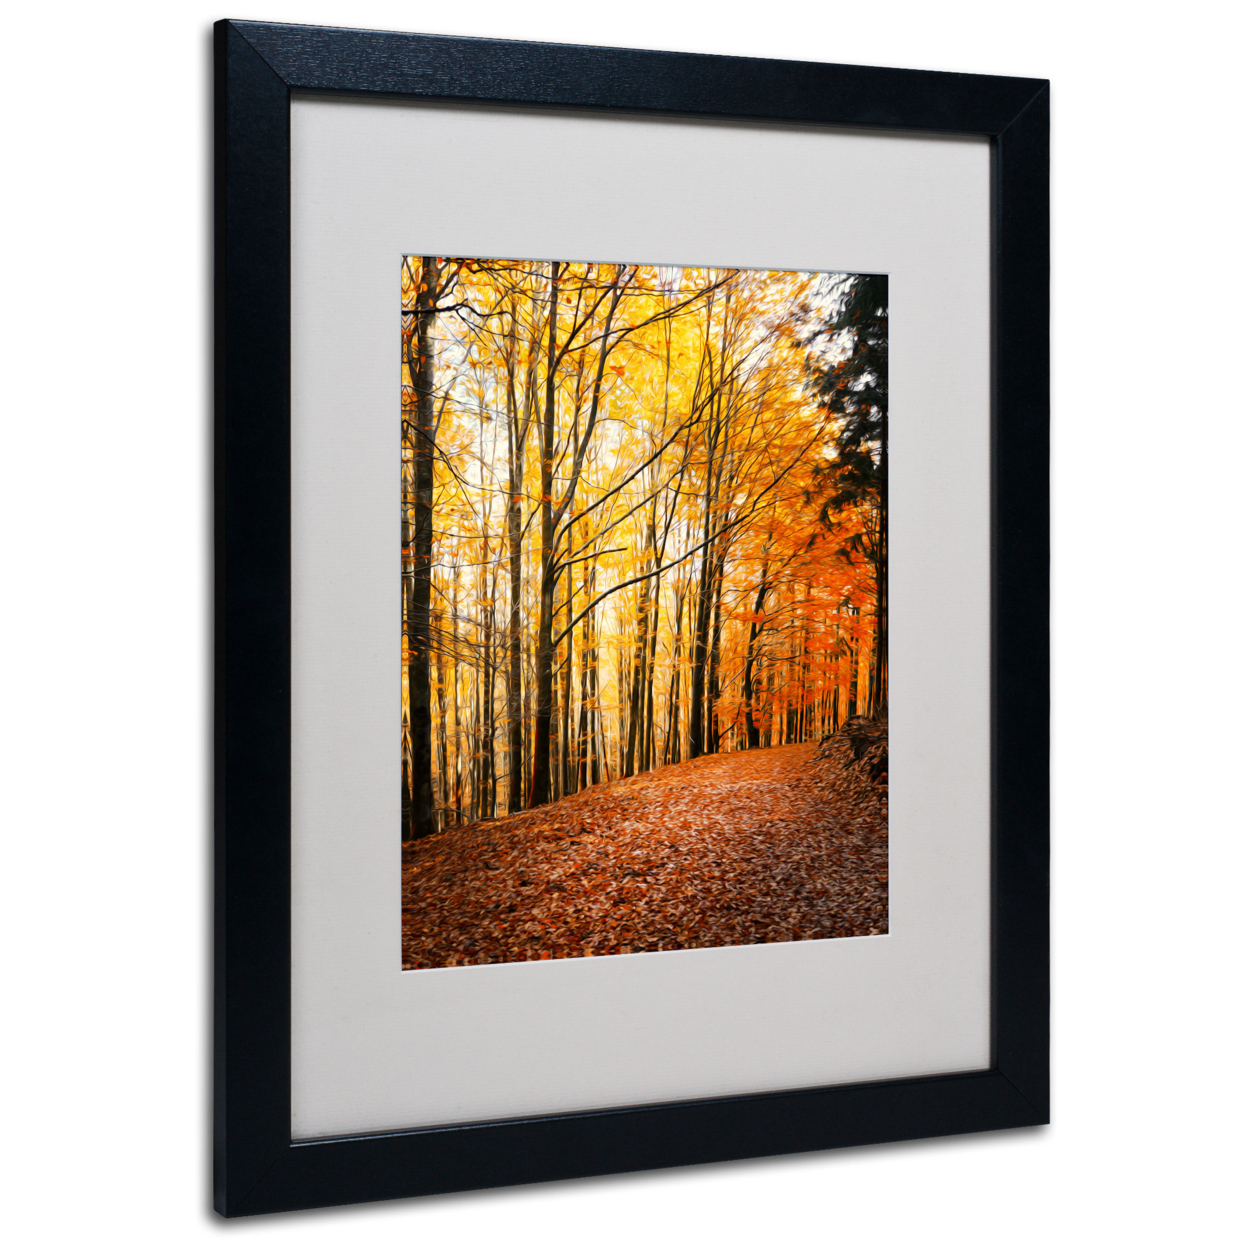 Philippe Sainte-Laudy 'Yellow Moment' Black Wooden Framed Art 18 X 22 Inches